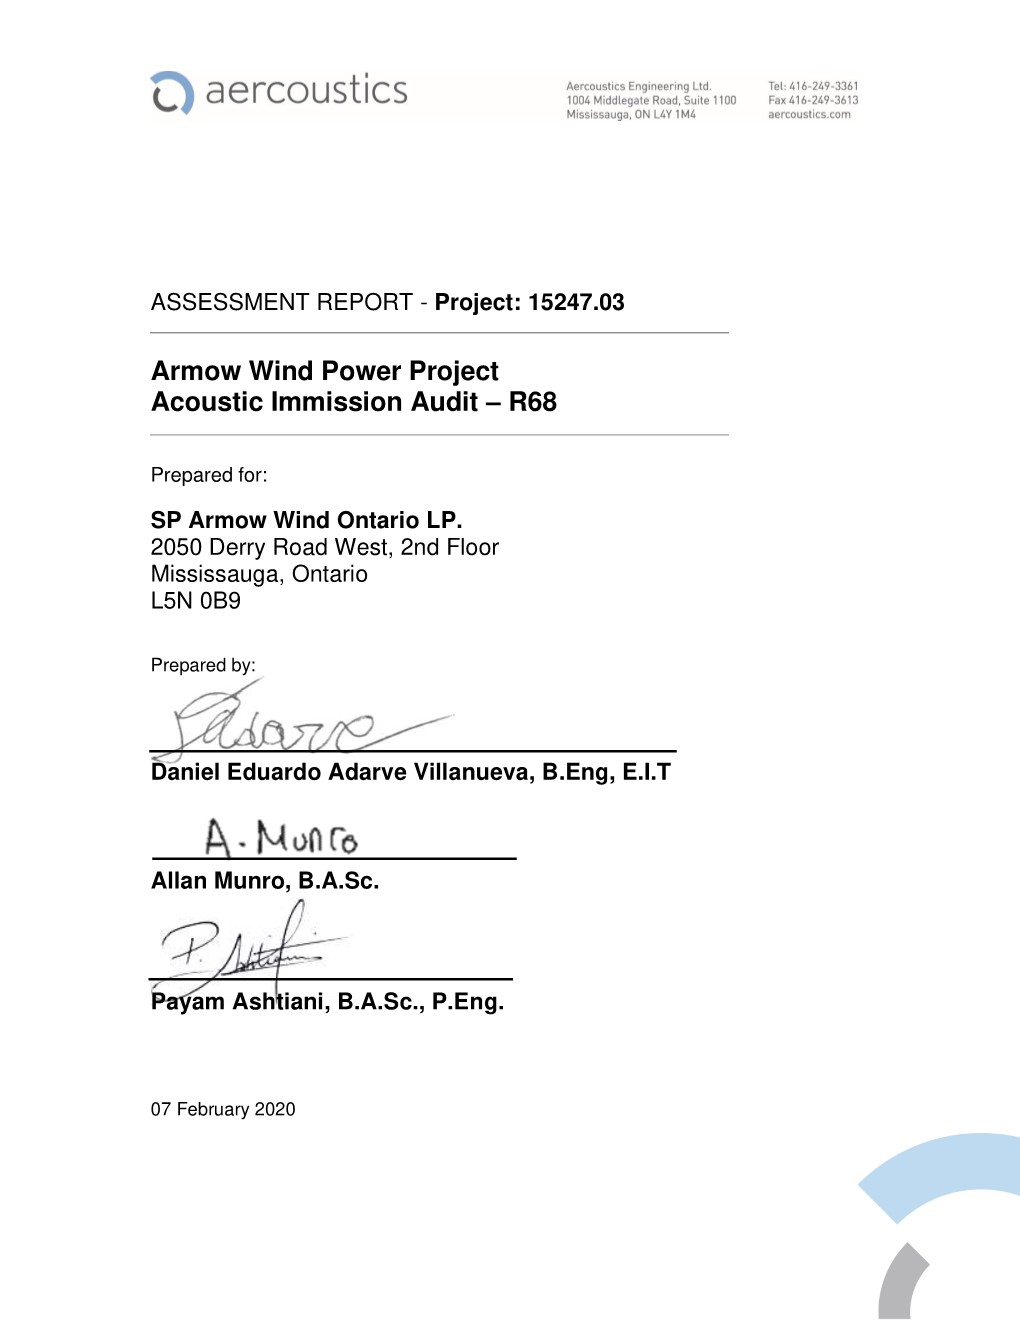 Armow Wind Power Project Acoustic Immission Audit – R68